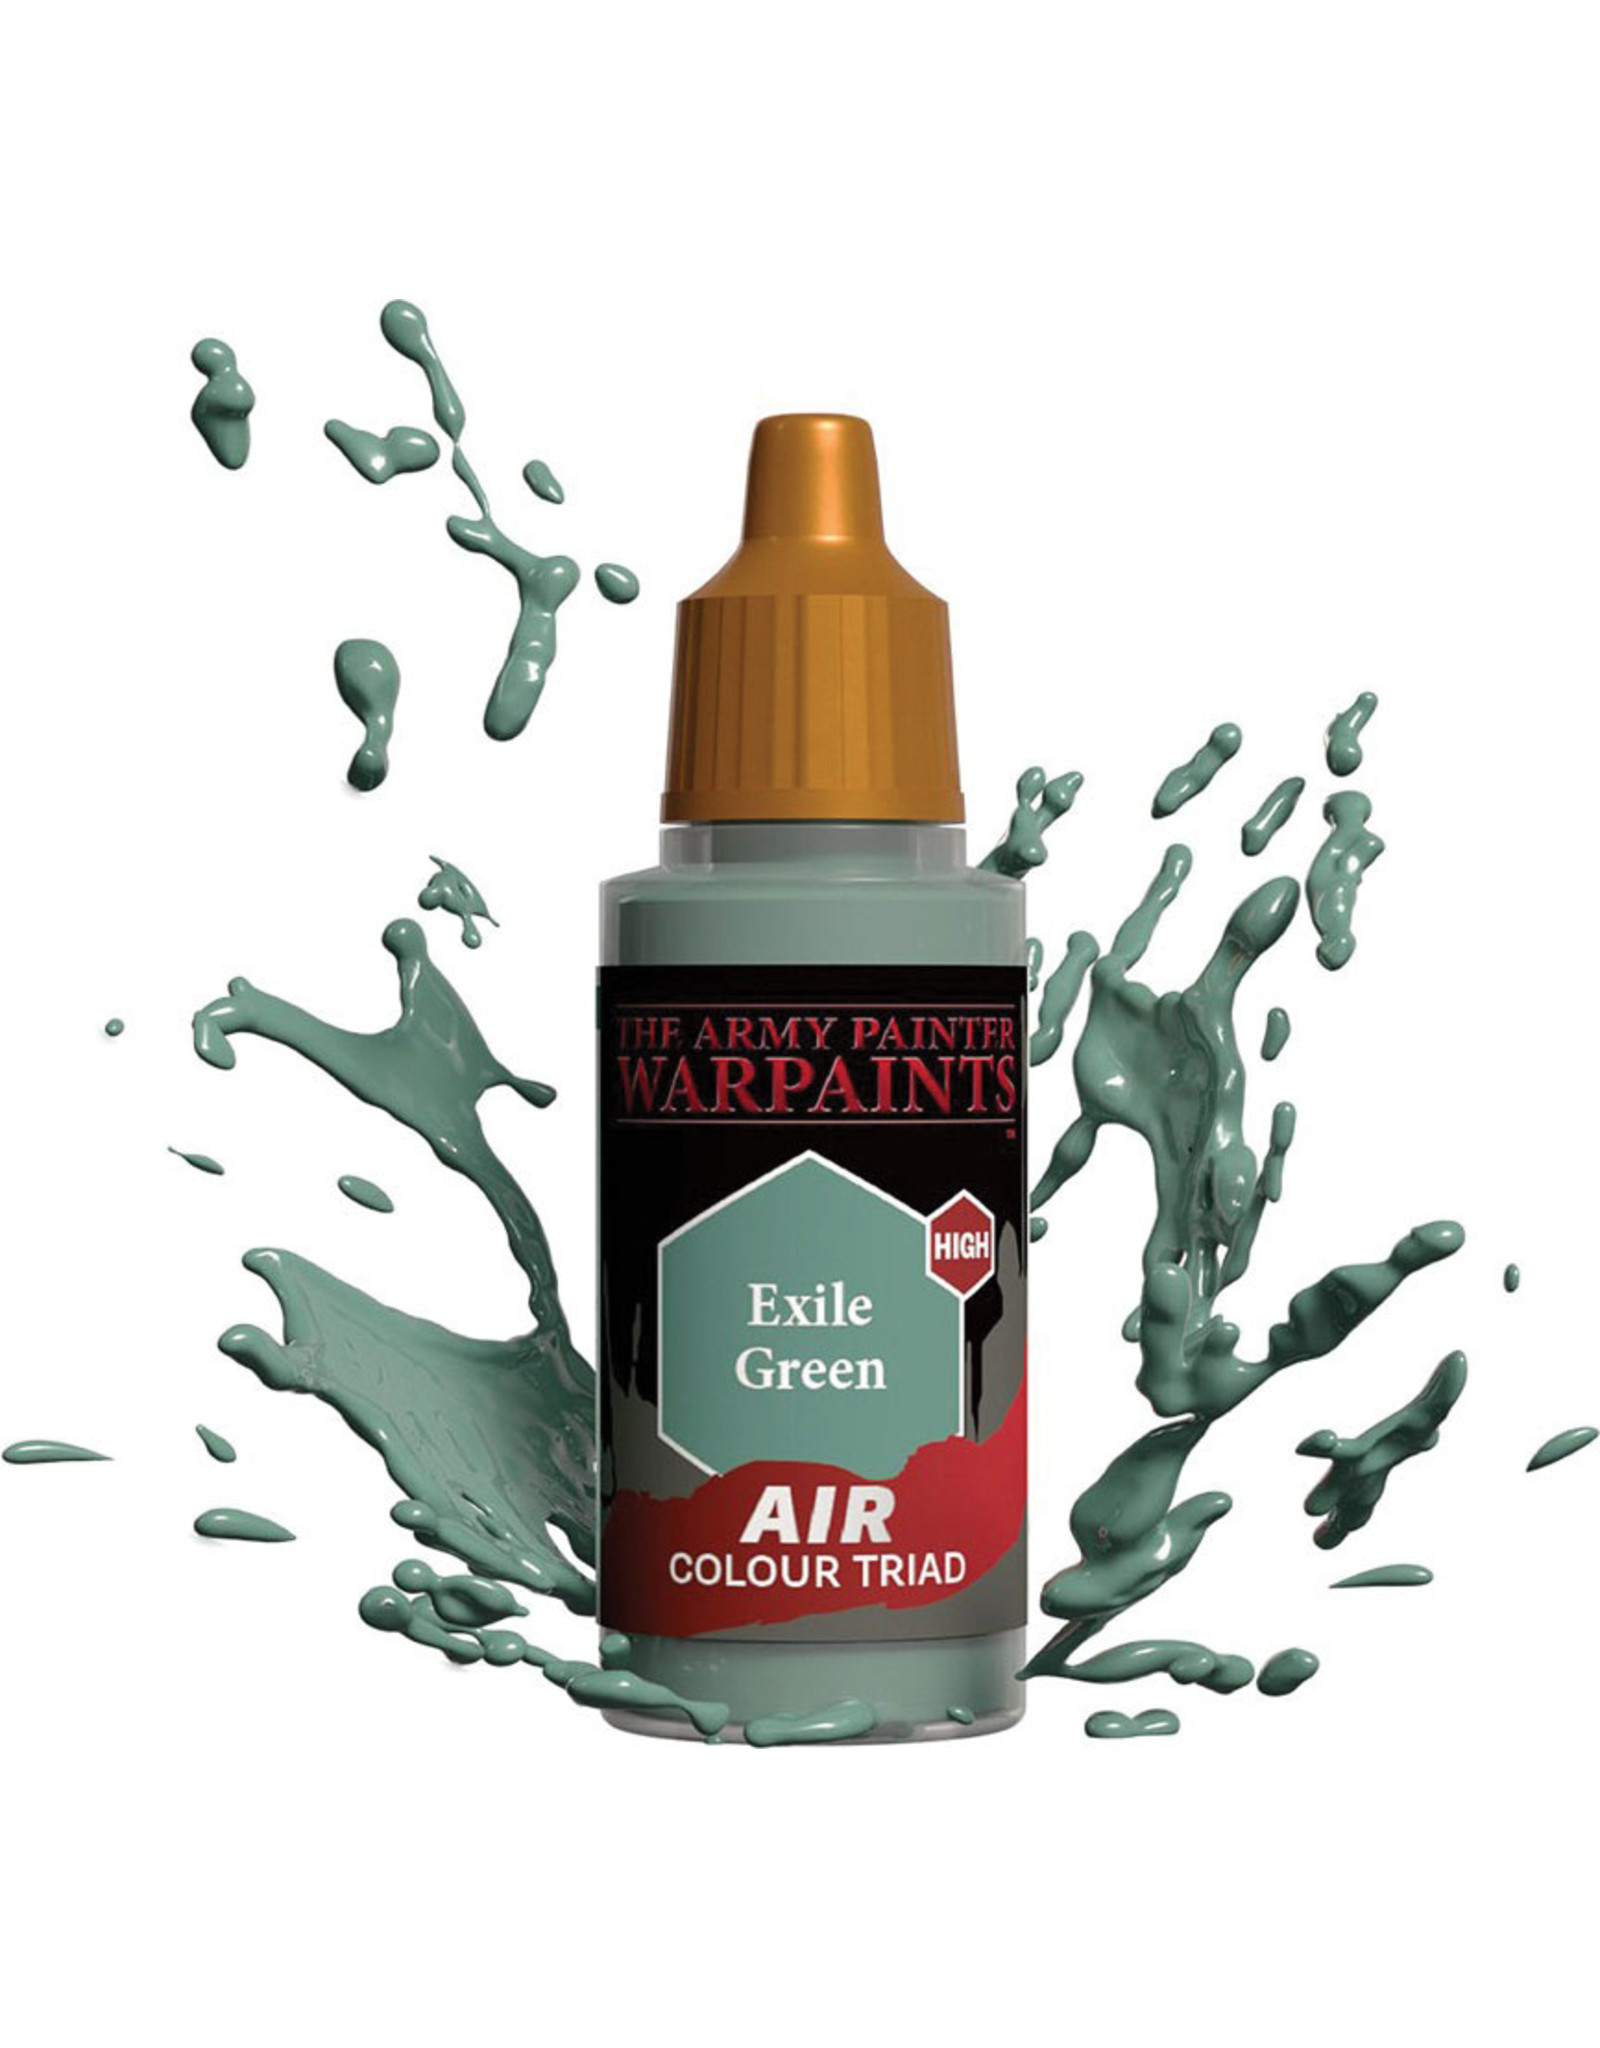 Army Painter Warpaint Air: Exile Green, 18ml.